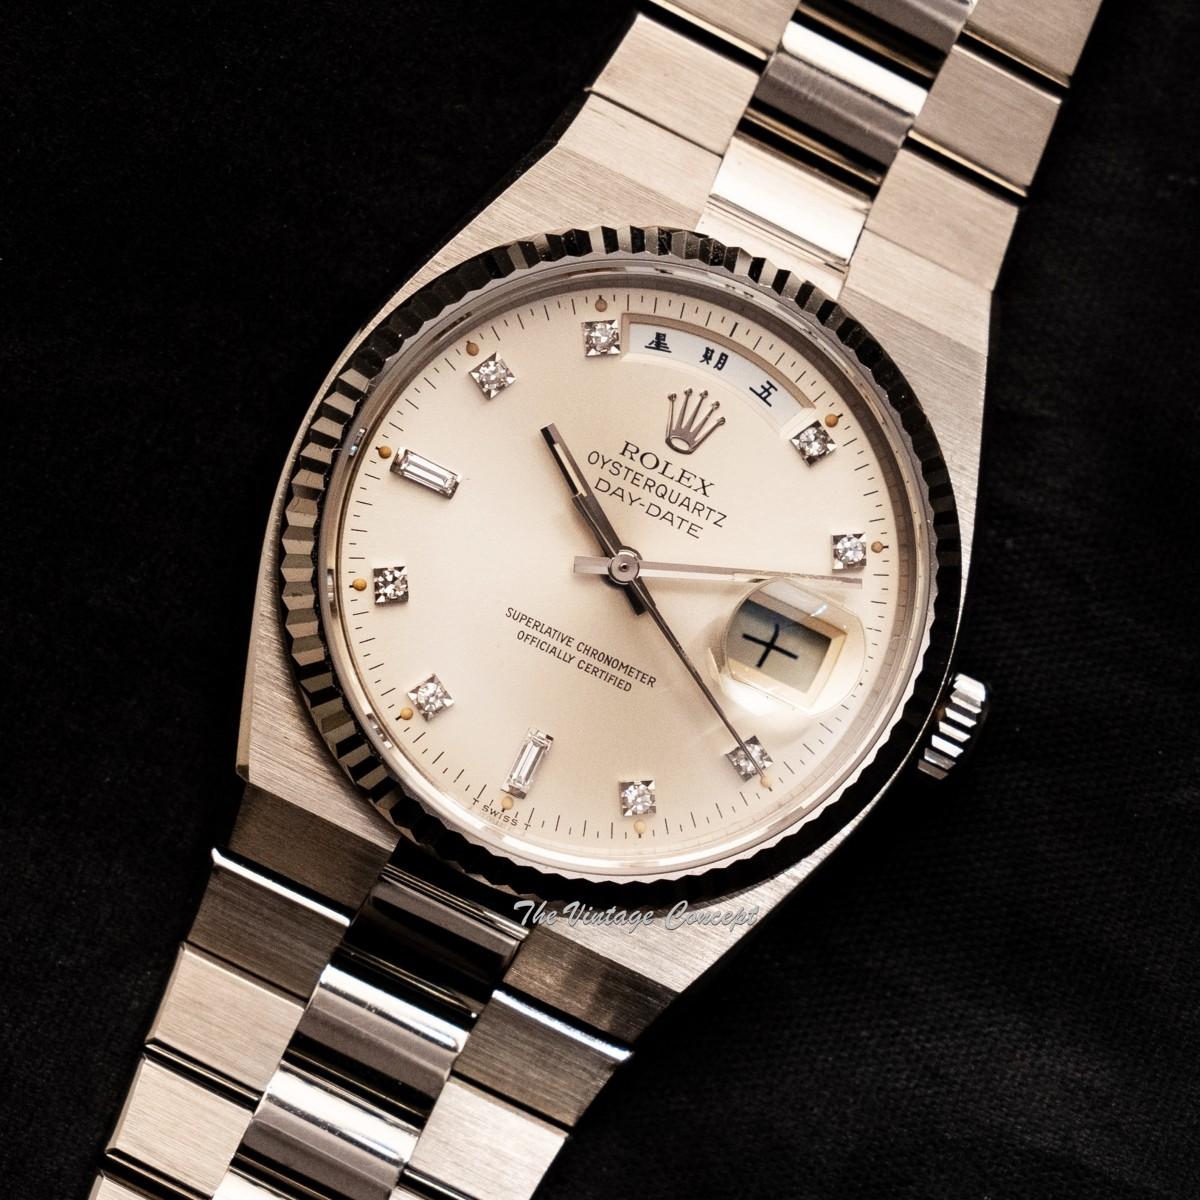 Rolex Day-Date Oysterquartz 18K White Gold Silver Dial Diamond Indexes 19019 (SOLD)